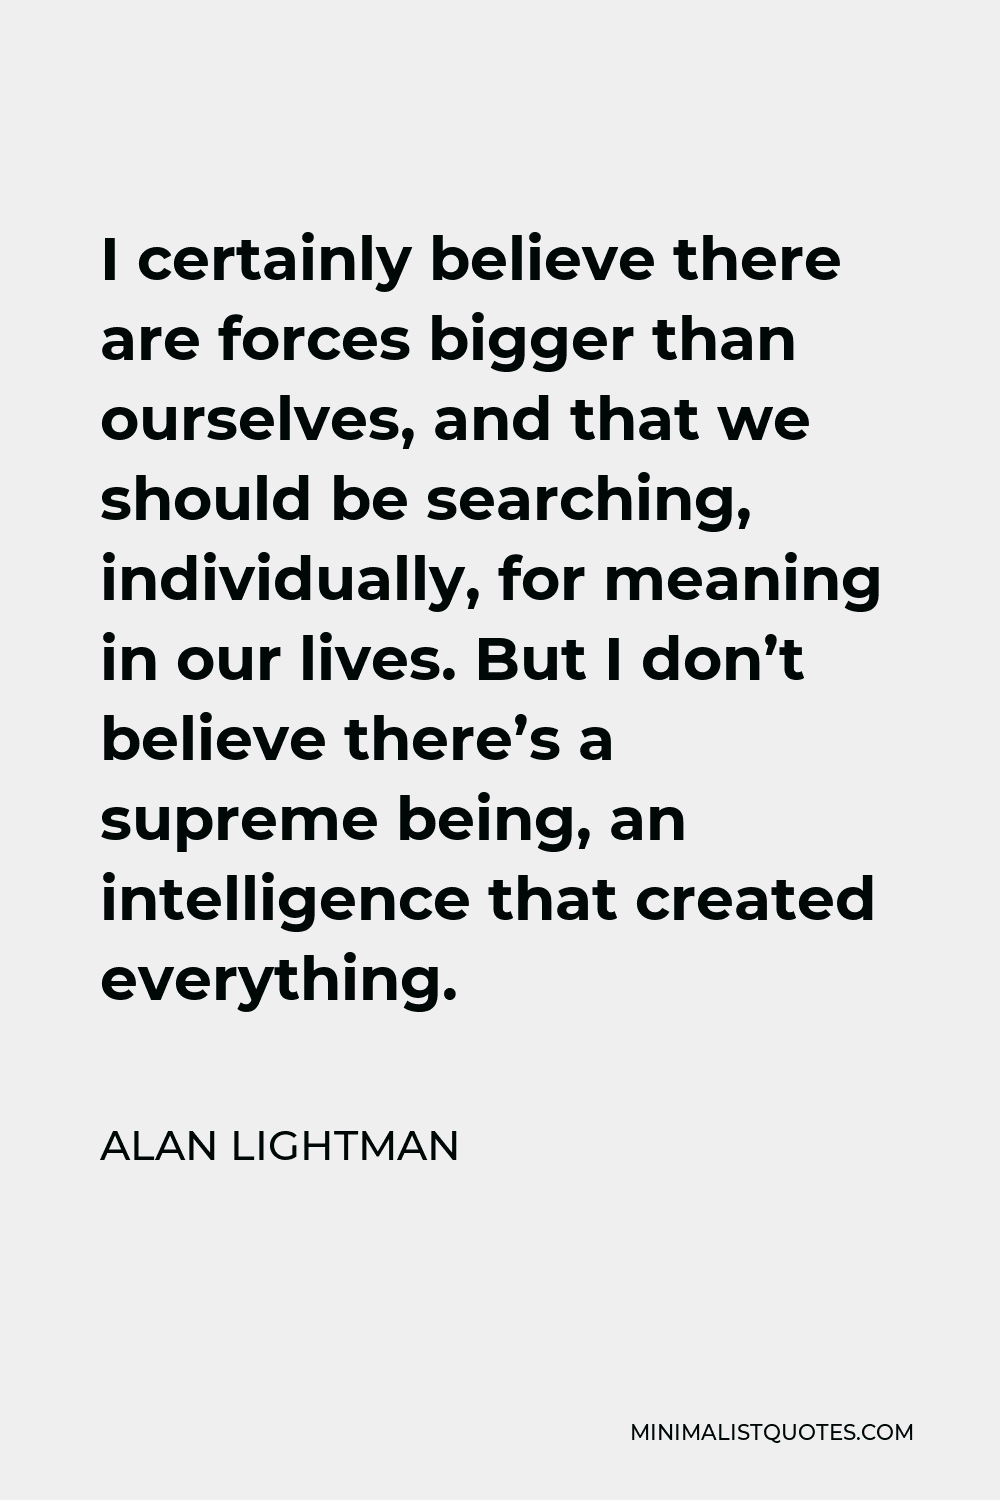 Alan Lightman Quote - I certainly believe there are forces bigger than ourselves, and that we should be searching, individually, for meaning in our lives. But I don’t believe there’s a supreme being, an intelligence that created everything.